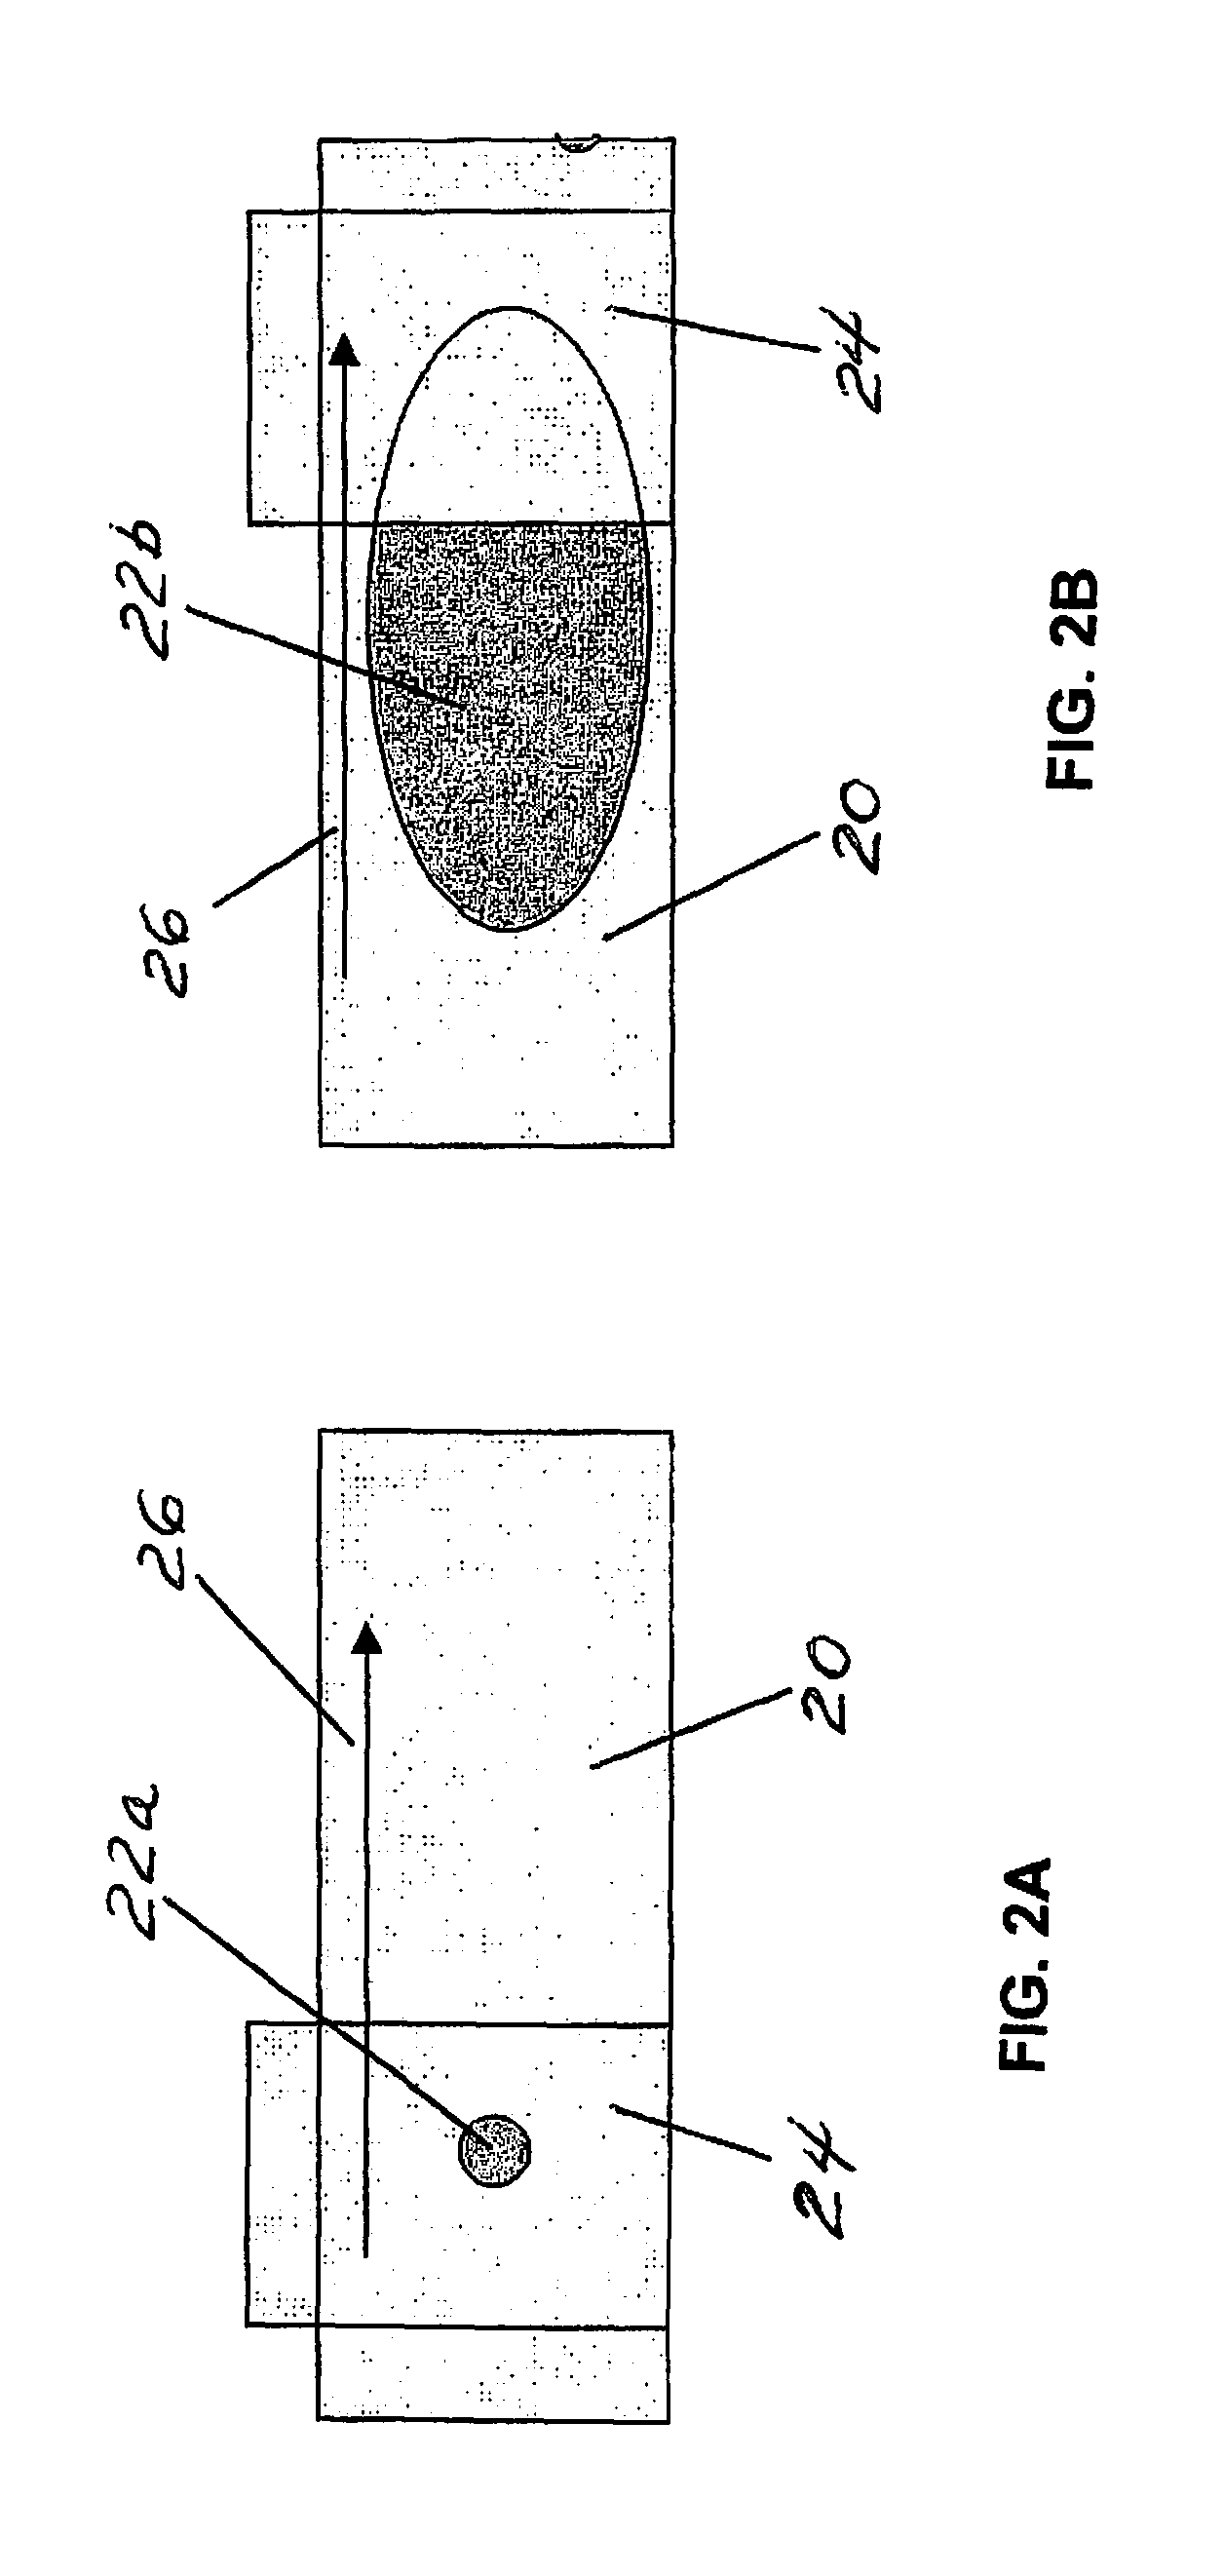 Method for performing a blood count and determining the morphology of a blood smear